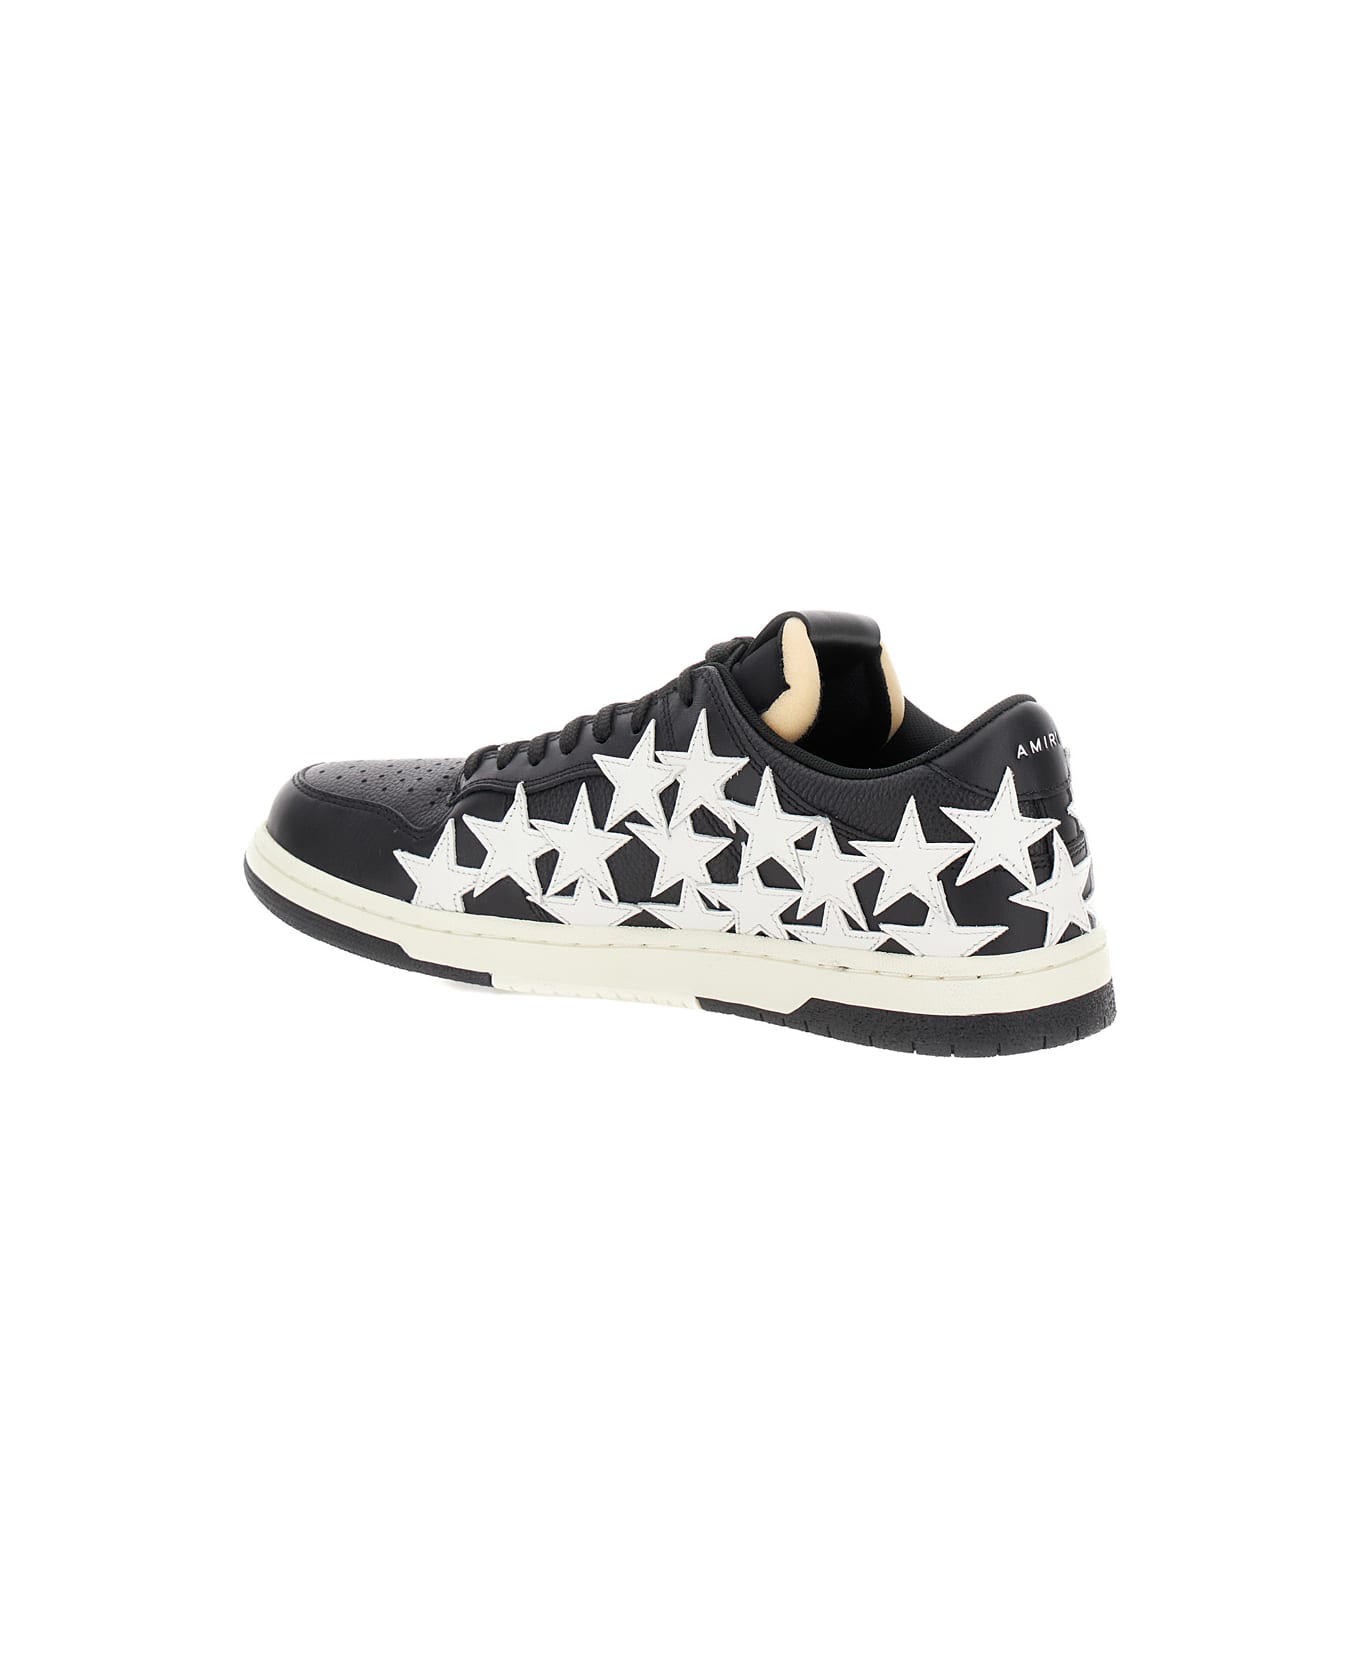 AMIRI 'stars Court' Black And White Low Top Sneakers With Star Patches In Leather Man - Black